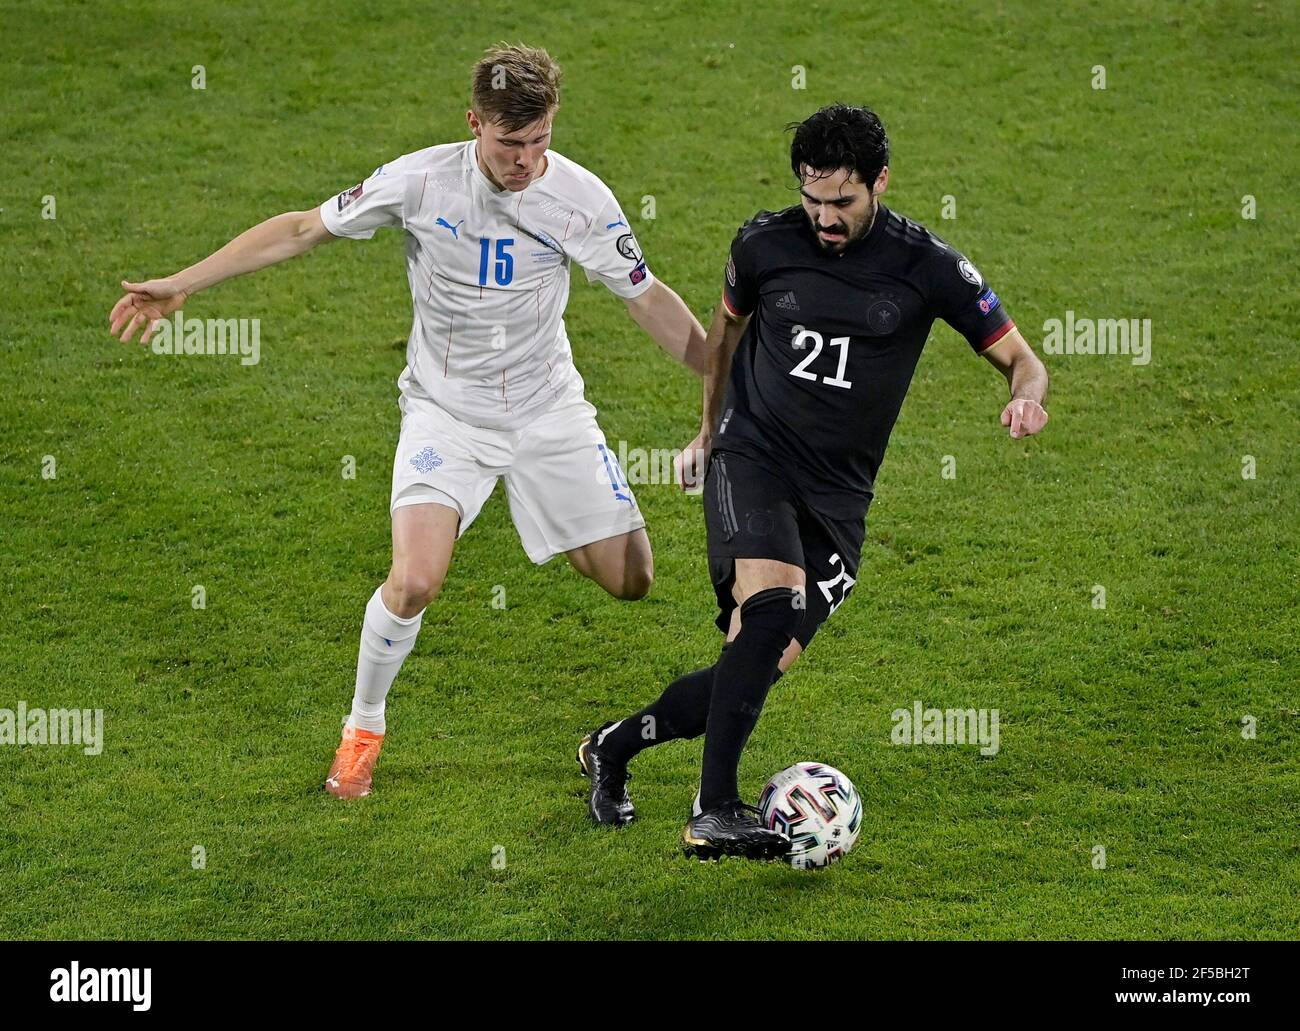 Soccer Football - World Cup Qualifiers Europe - Group J - Germany v Iceland - MSV-Arena, Duisburg, Germany - March 25, 2021 Iceland's Alfons Sampsted in action with Germany's Ilkay Gundogan REUTERS/Tobias Schwarz Stock Photo